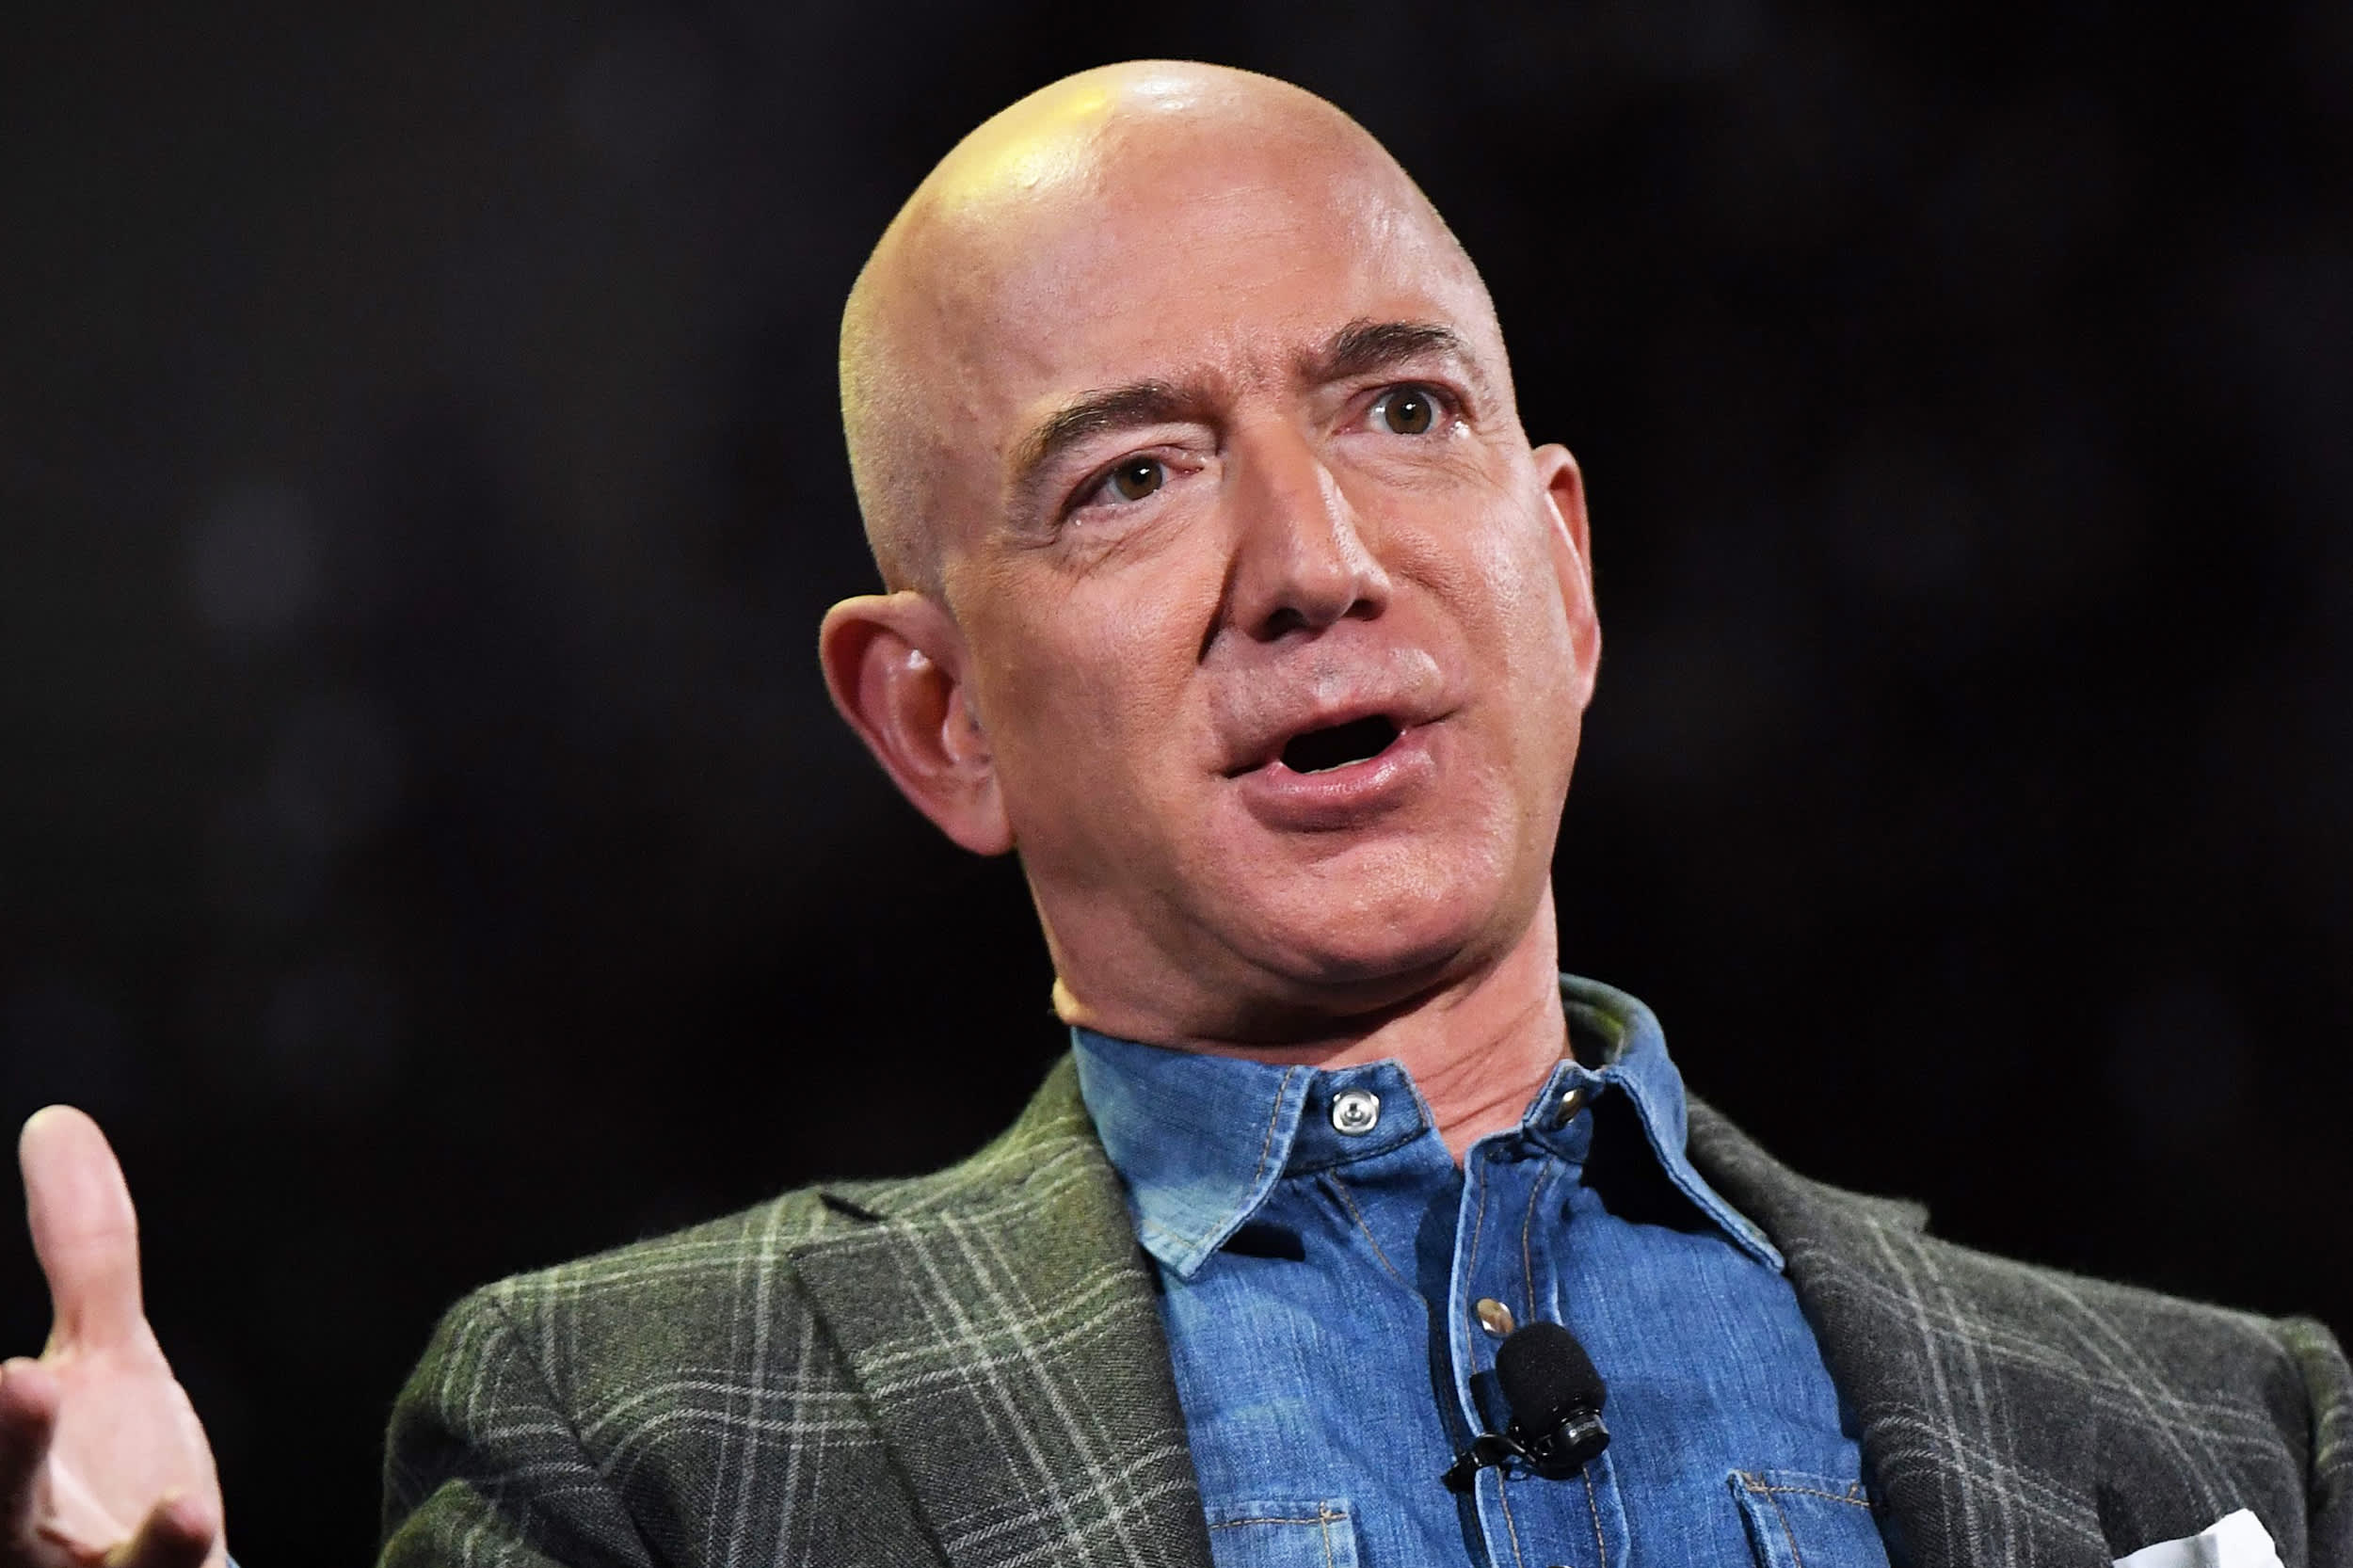 Jeff Bezos says he supports raising the tax rate